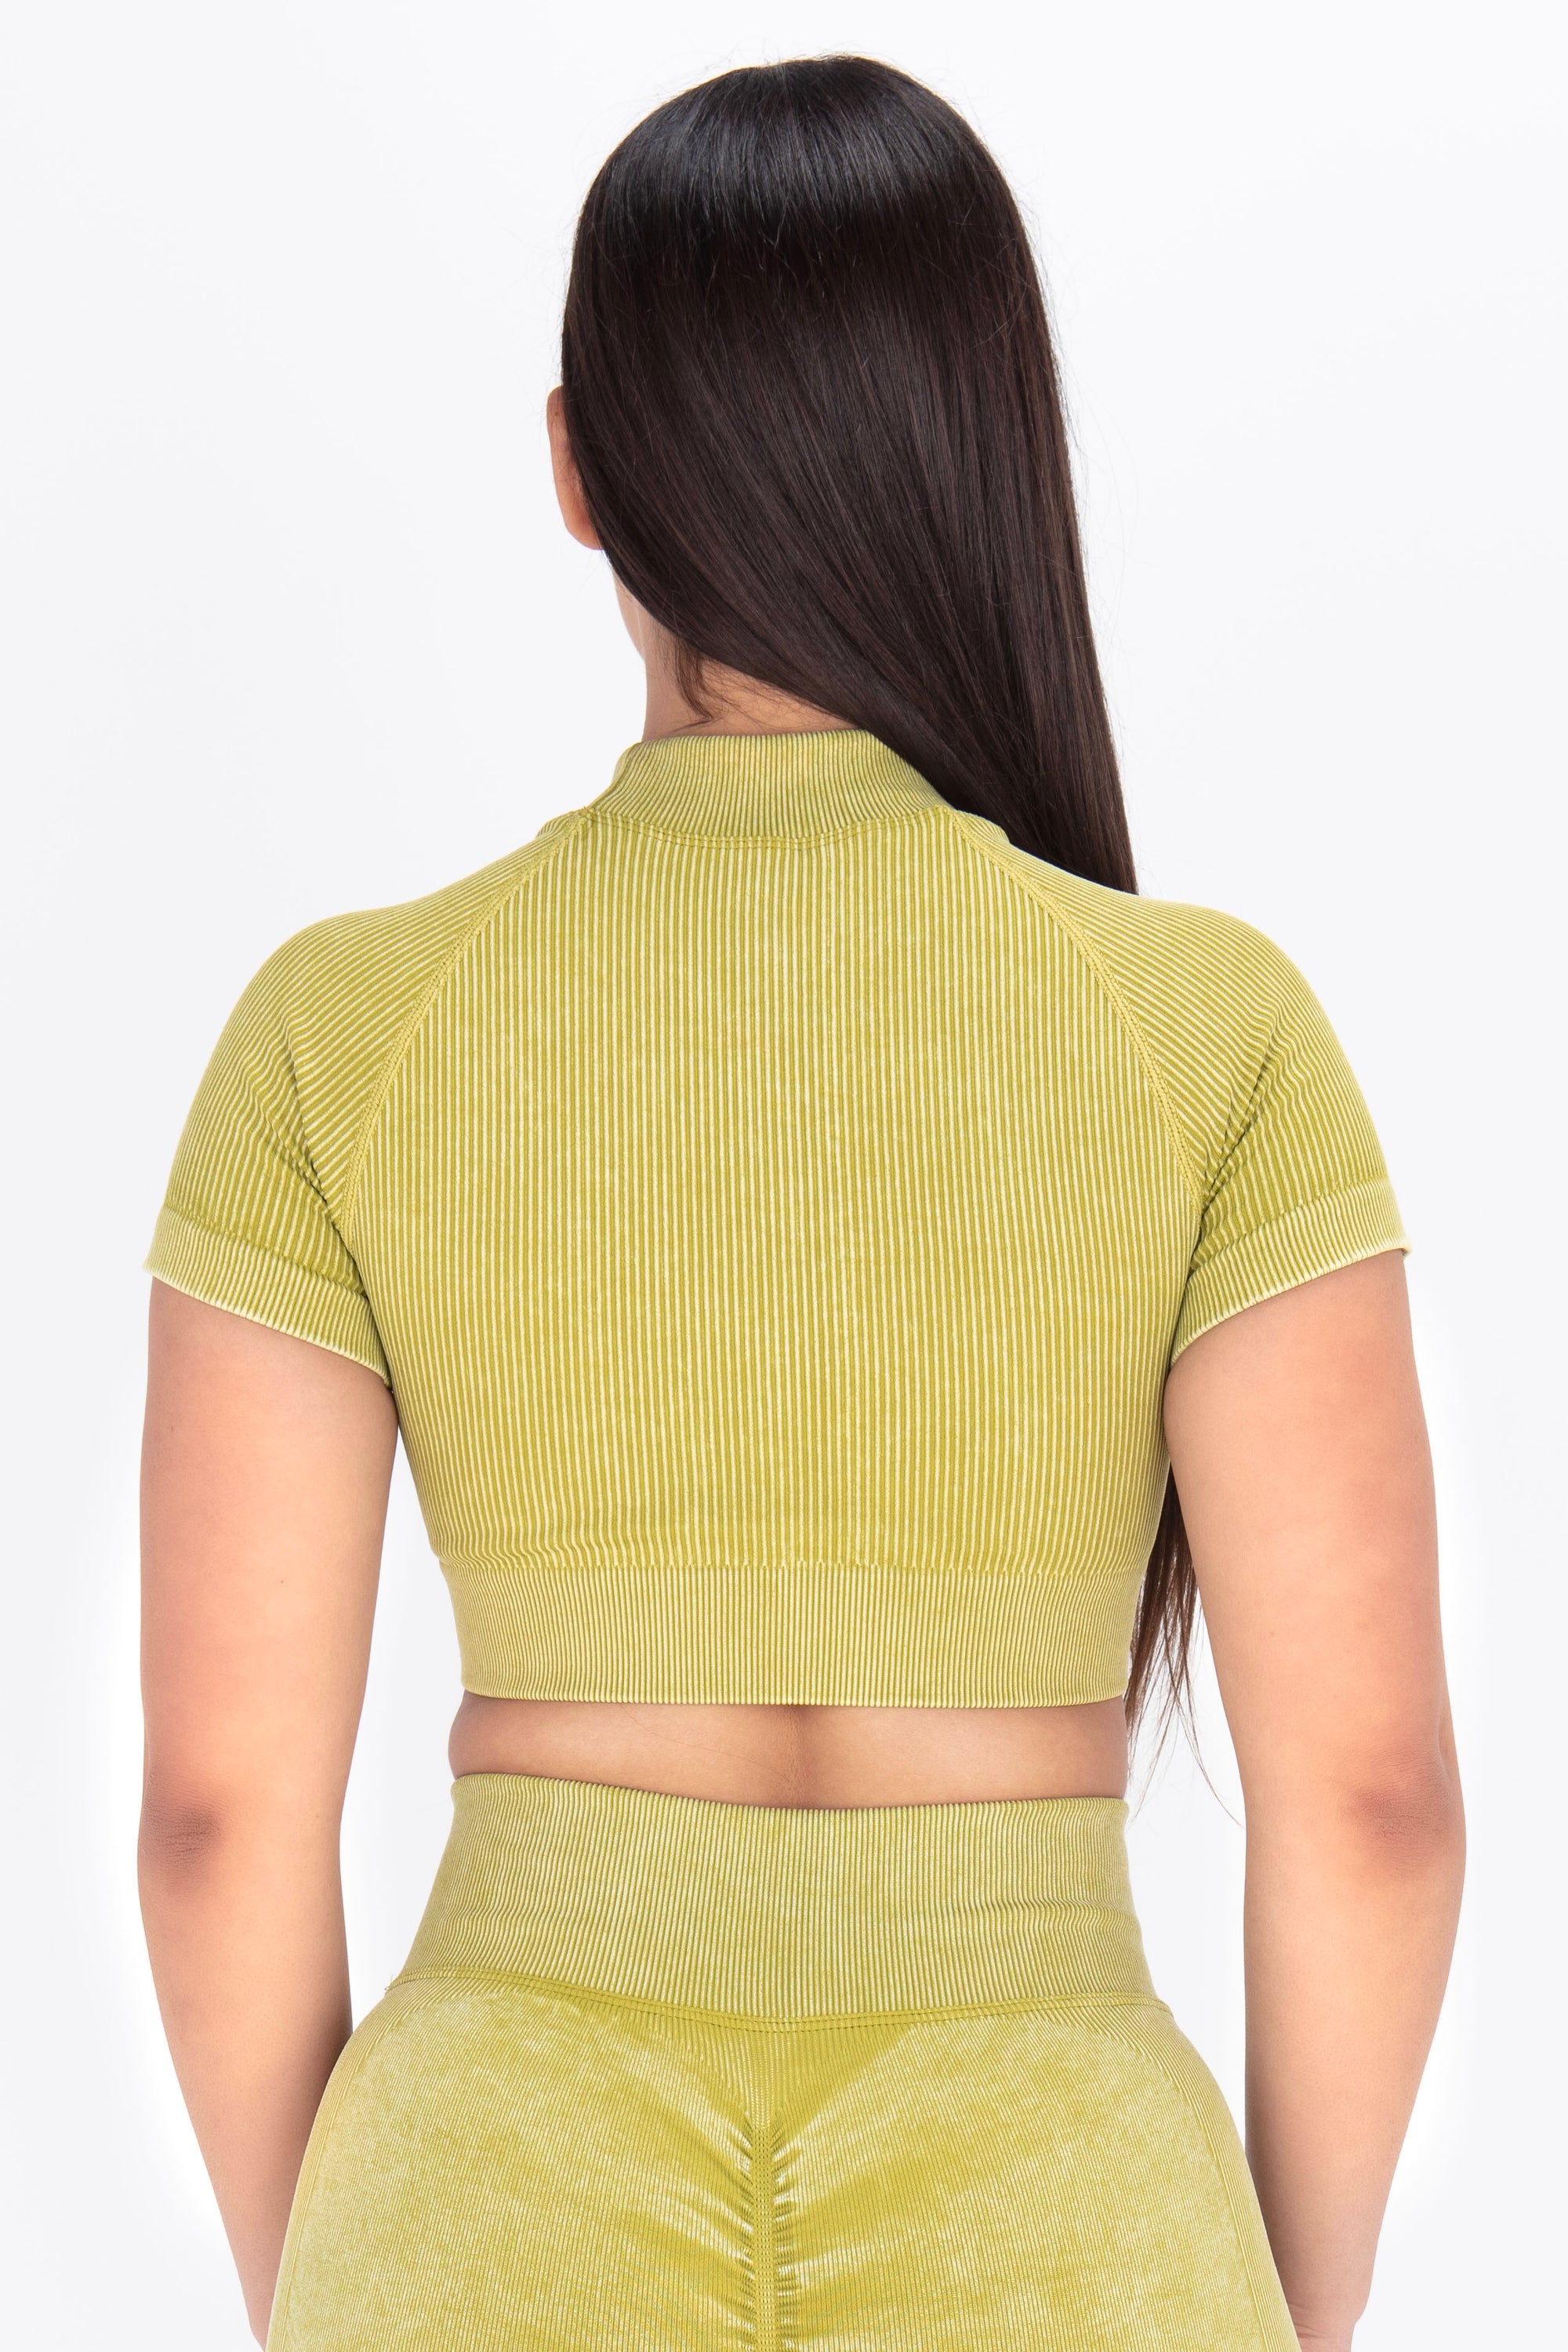 Ambiance Apparel Ambiance Yellow Lace Cropped Top - $10 (52